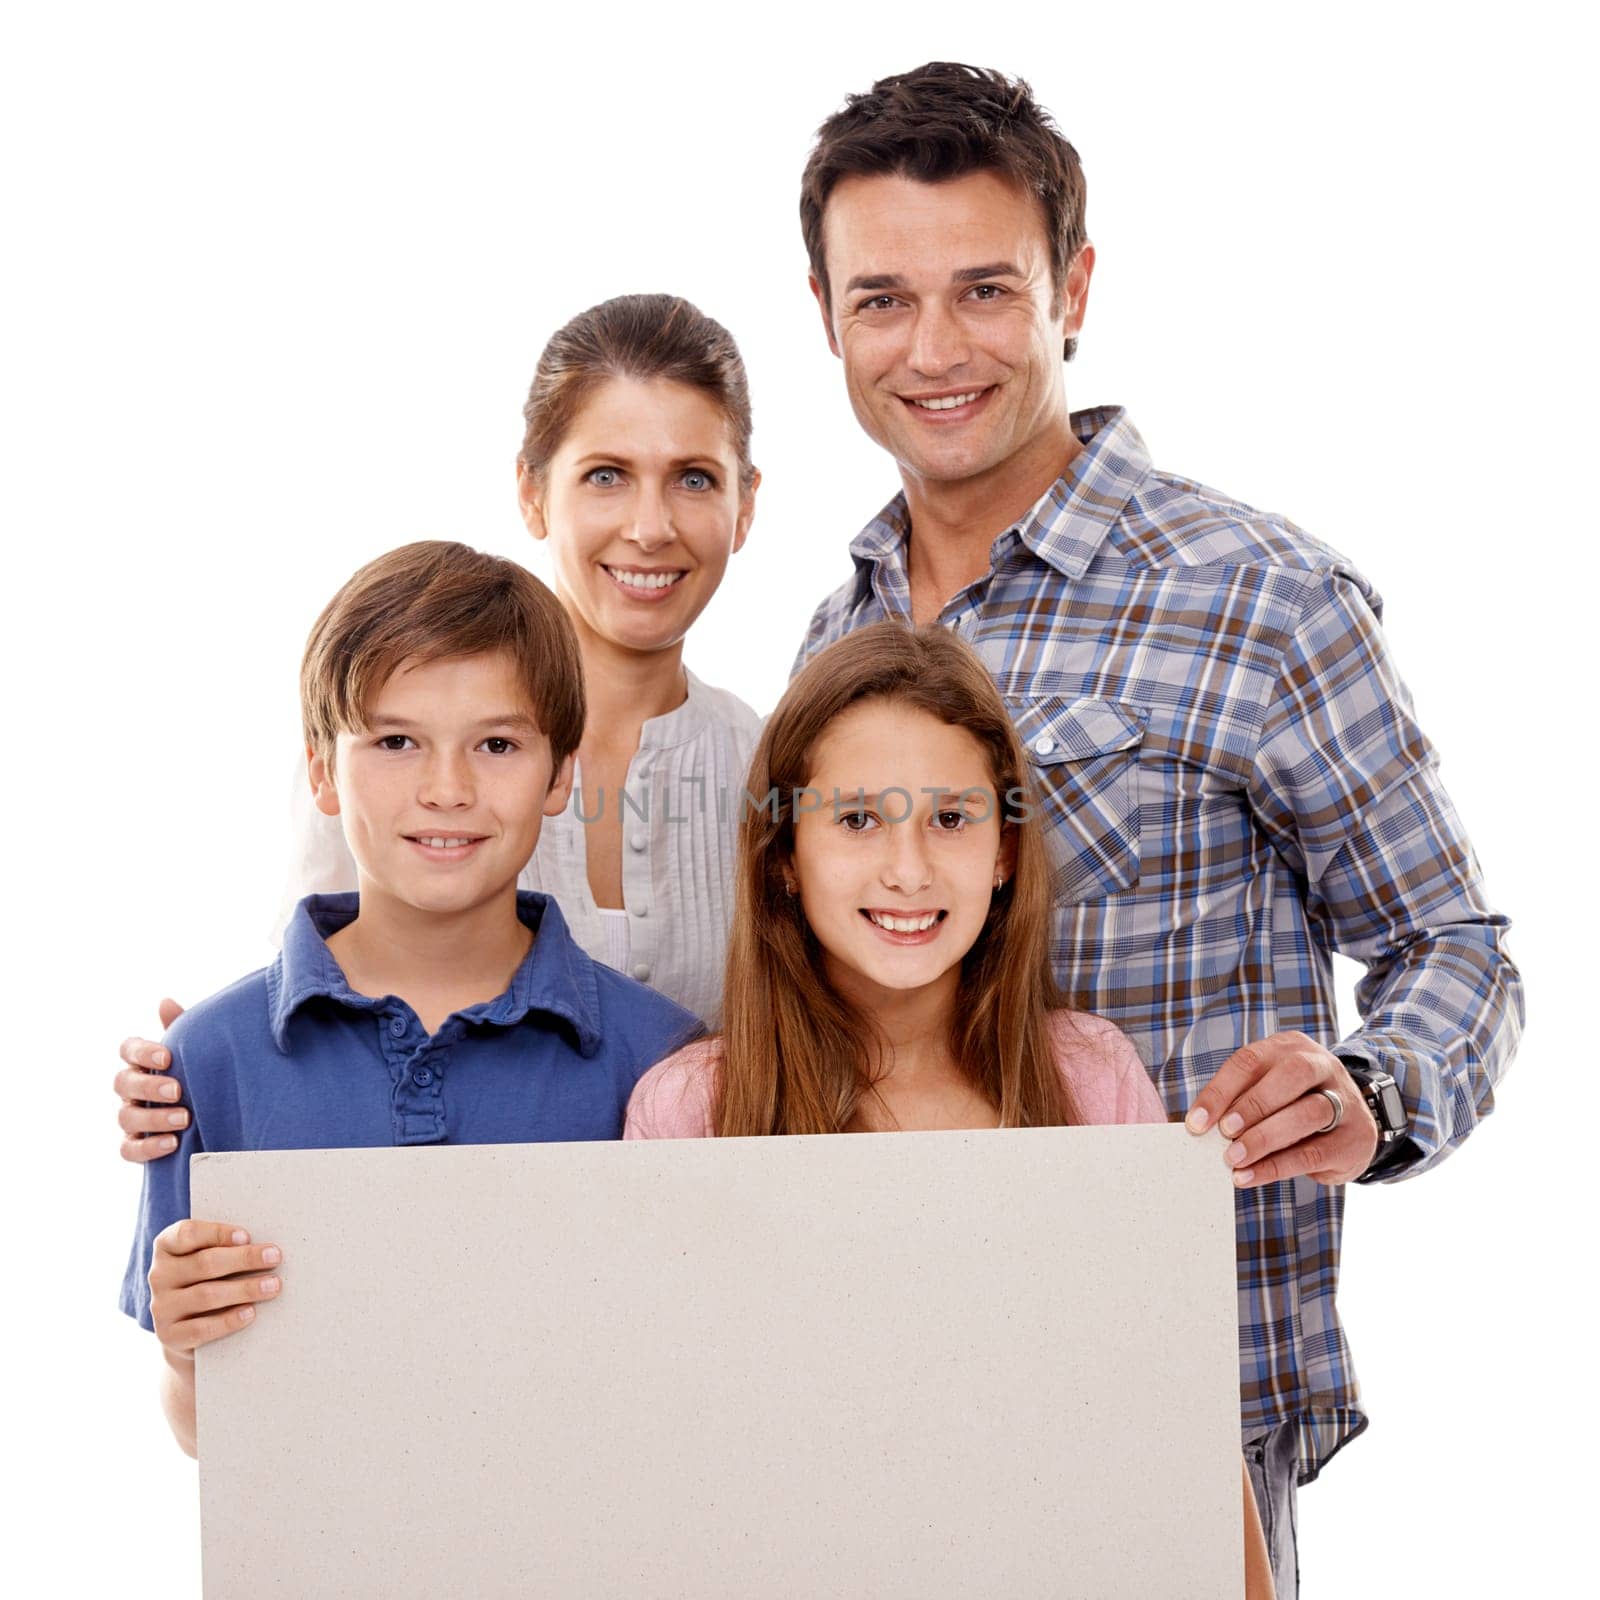 Parents, kids and studio with blank poster in portrait with smile for bonding, love and space by white background. Mother, father and children with mockup, promotion or happy for family with security.